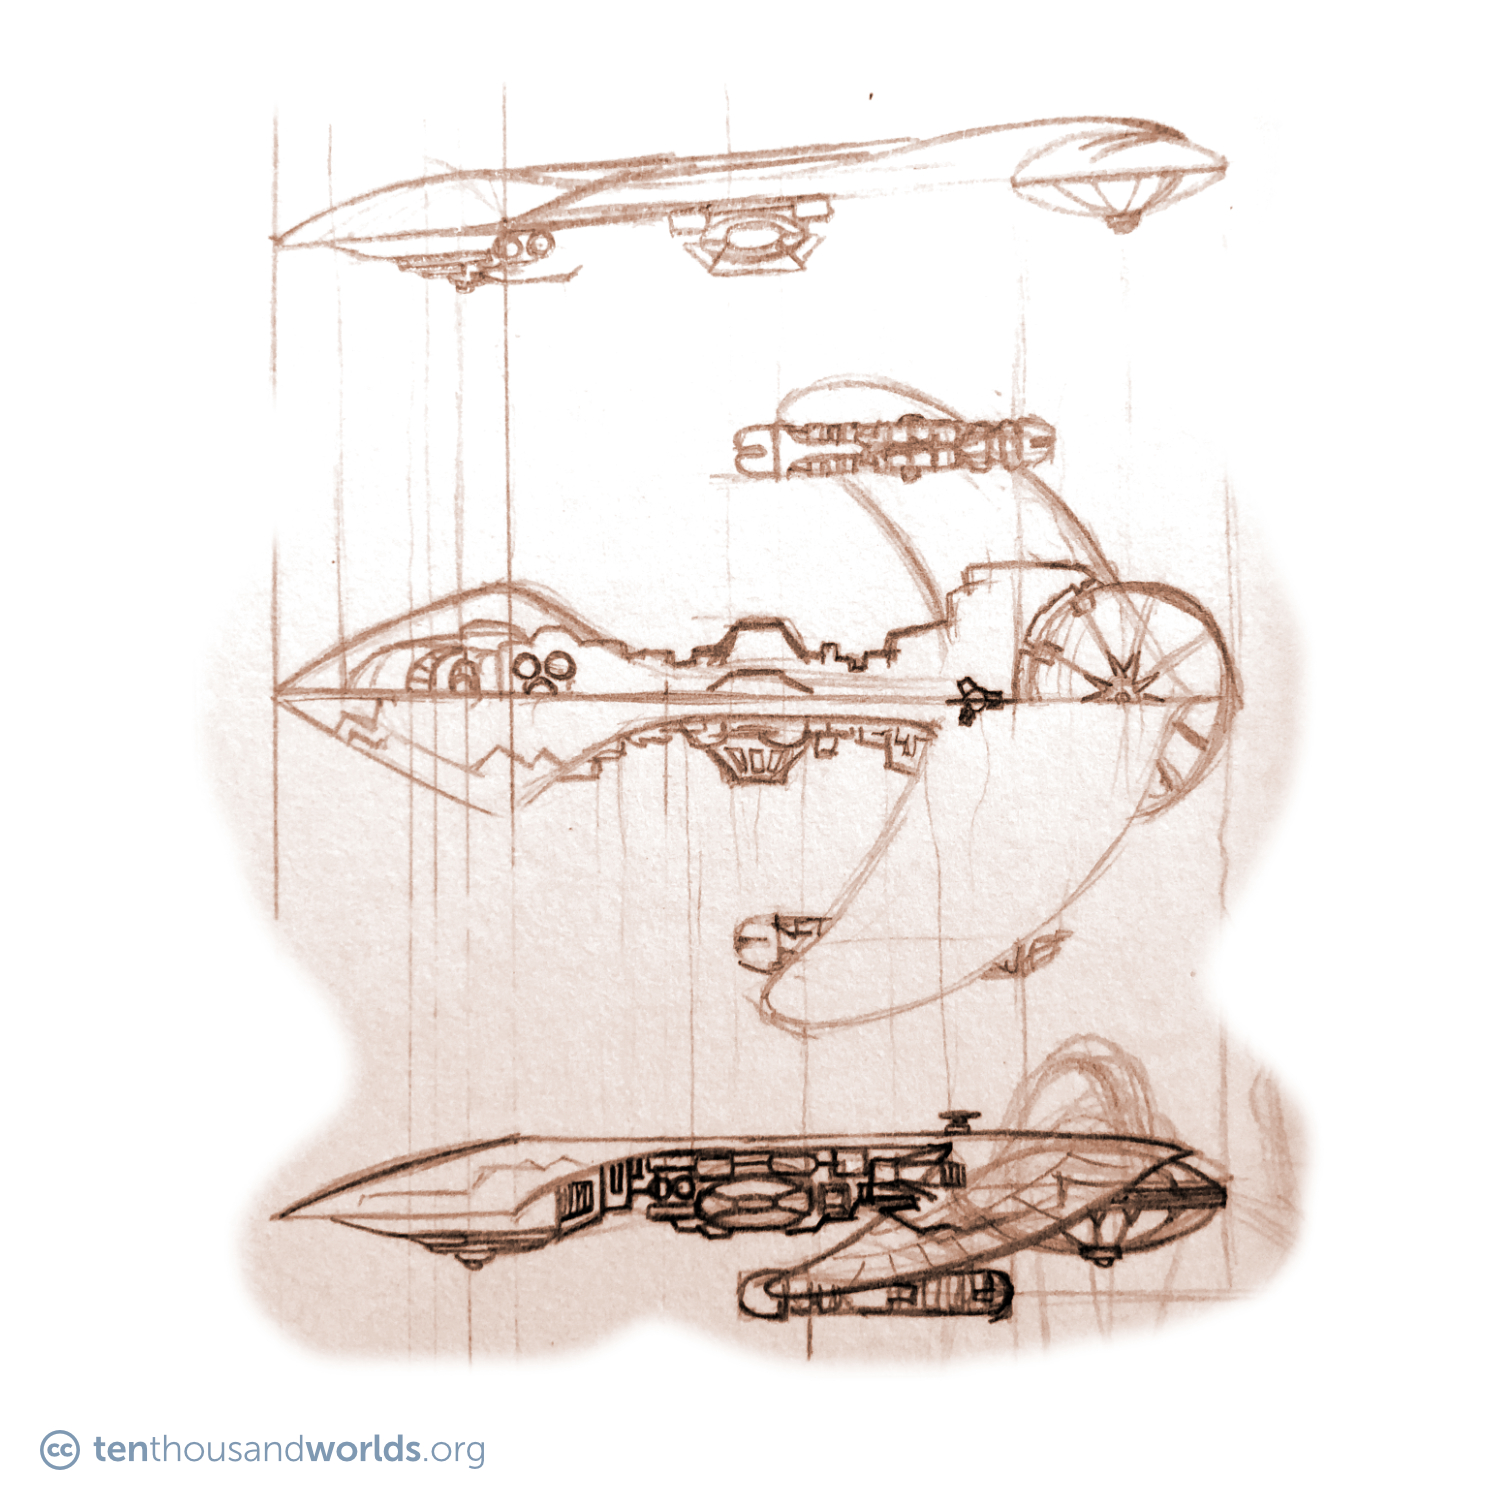 A pencil sketch showing views of the top and port (left) sides of a spaceship. The front is shaped like an arrowhead. The back is one large crescent wing from which two engines hang. Between and underneath each end are dozens of boxy interconnected compartments.